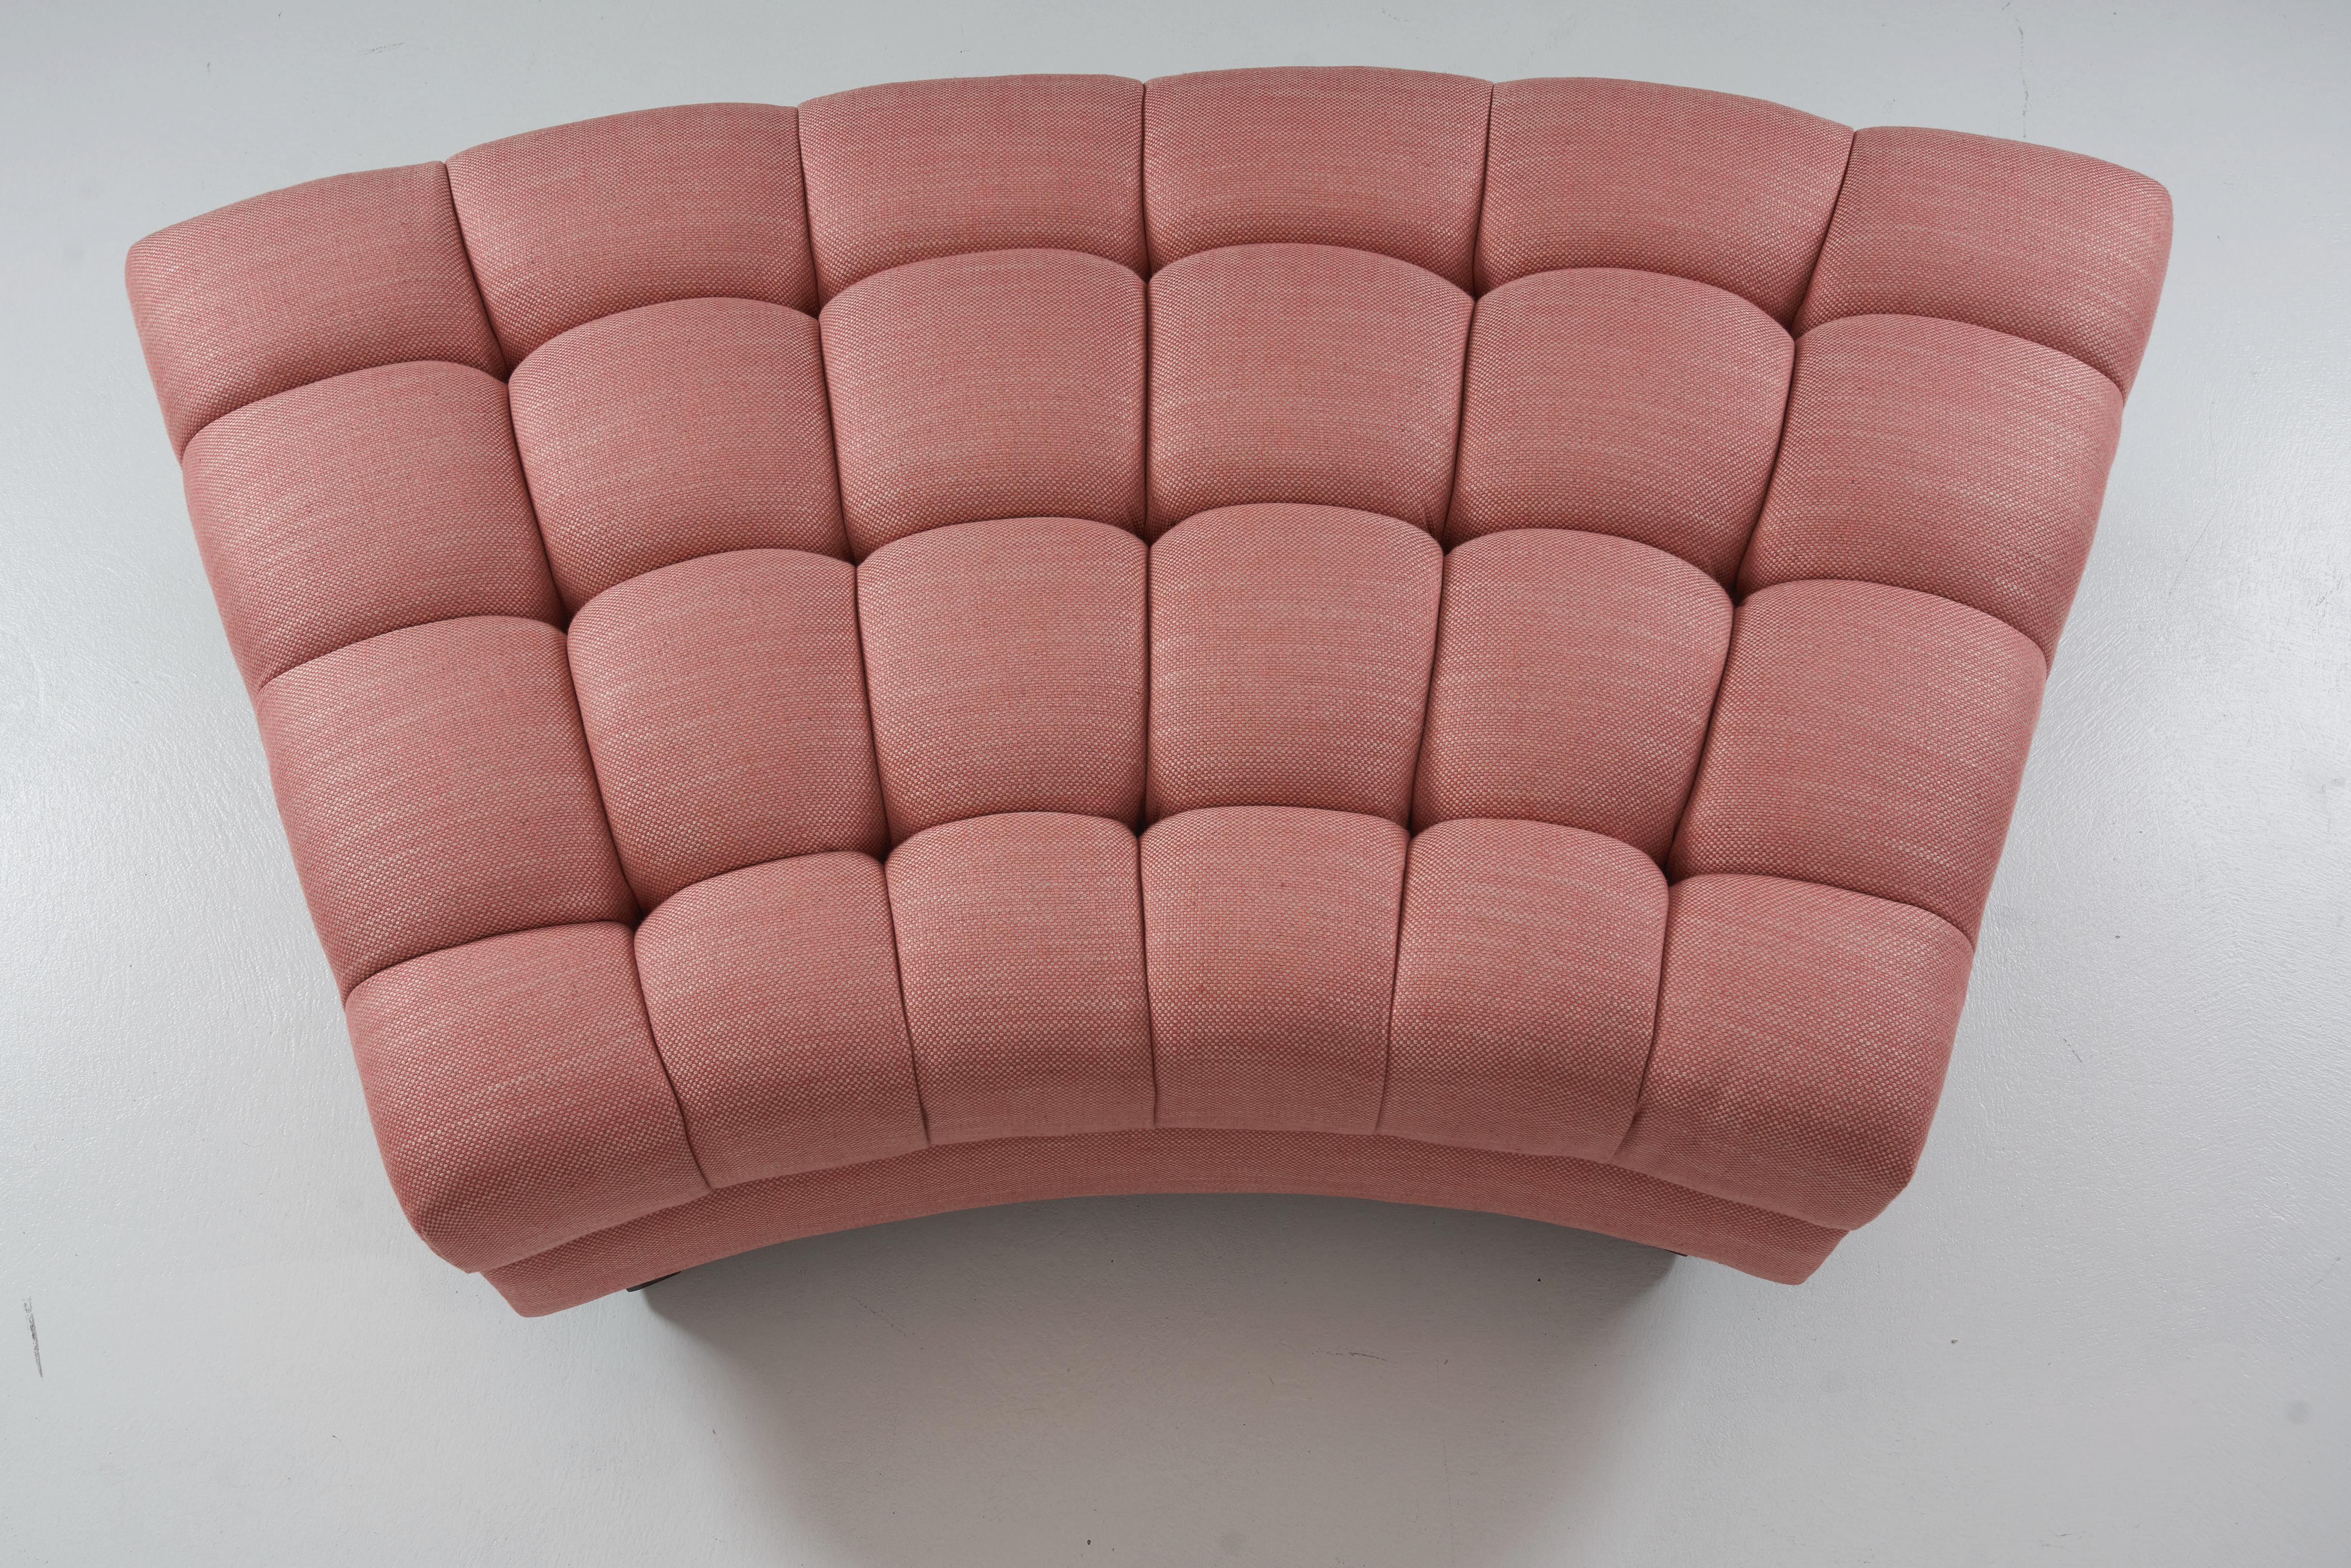 Biscuit Tufted, Guava Colored, Curved Three Piece Sectional by William Haines 3